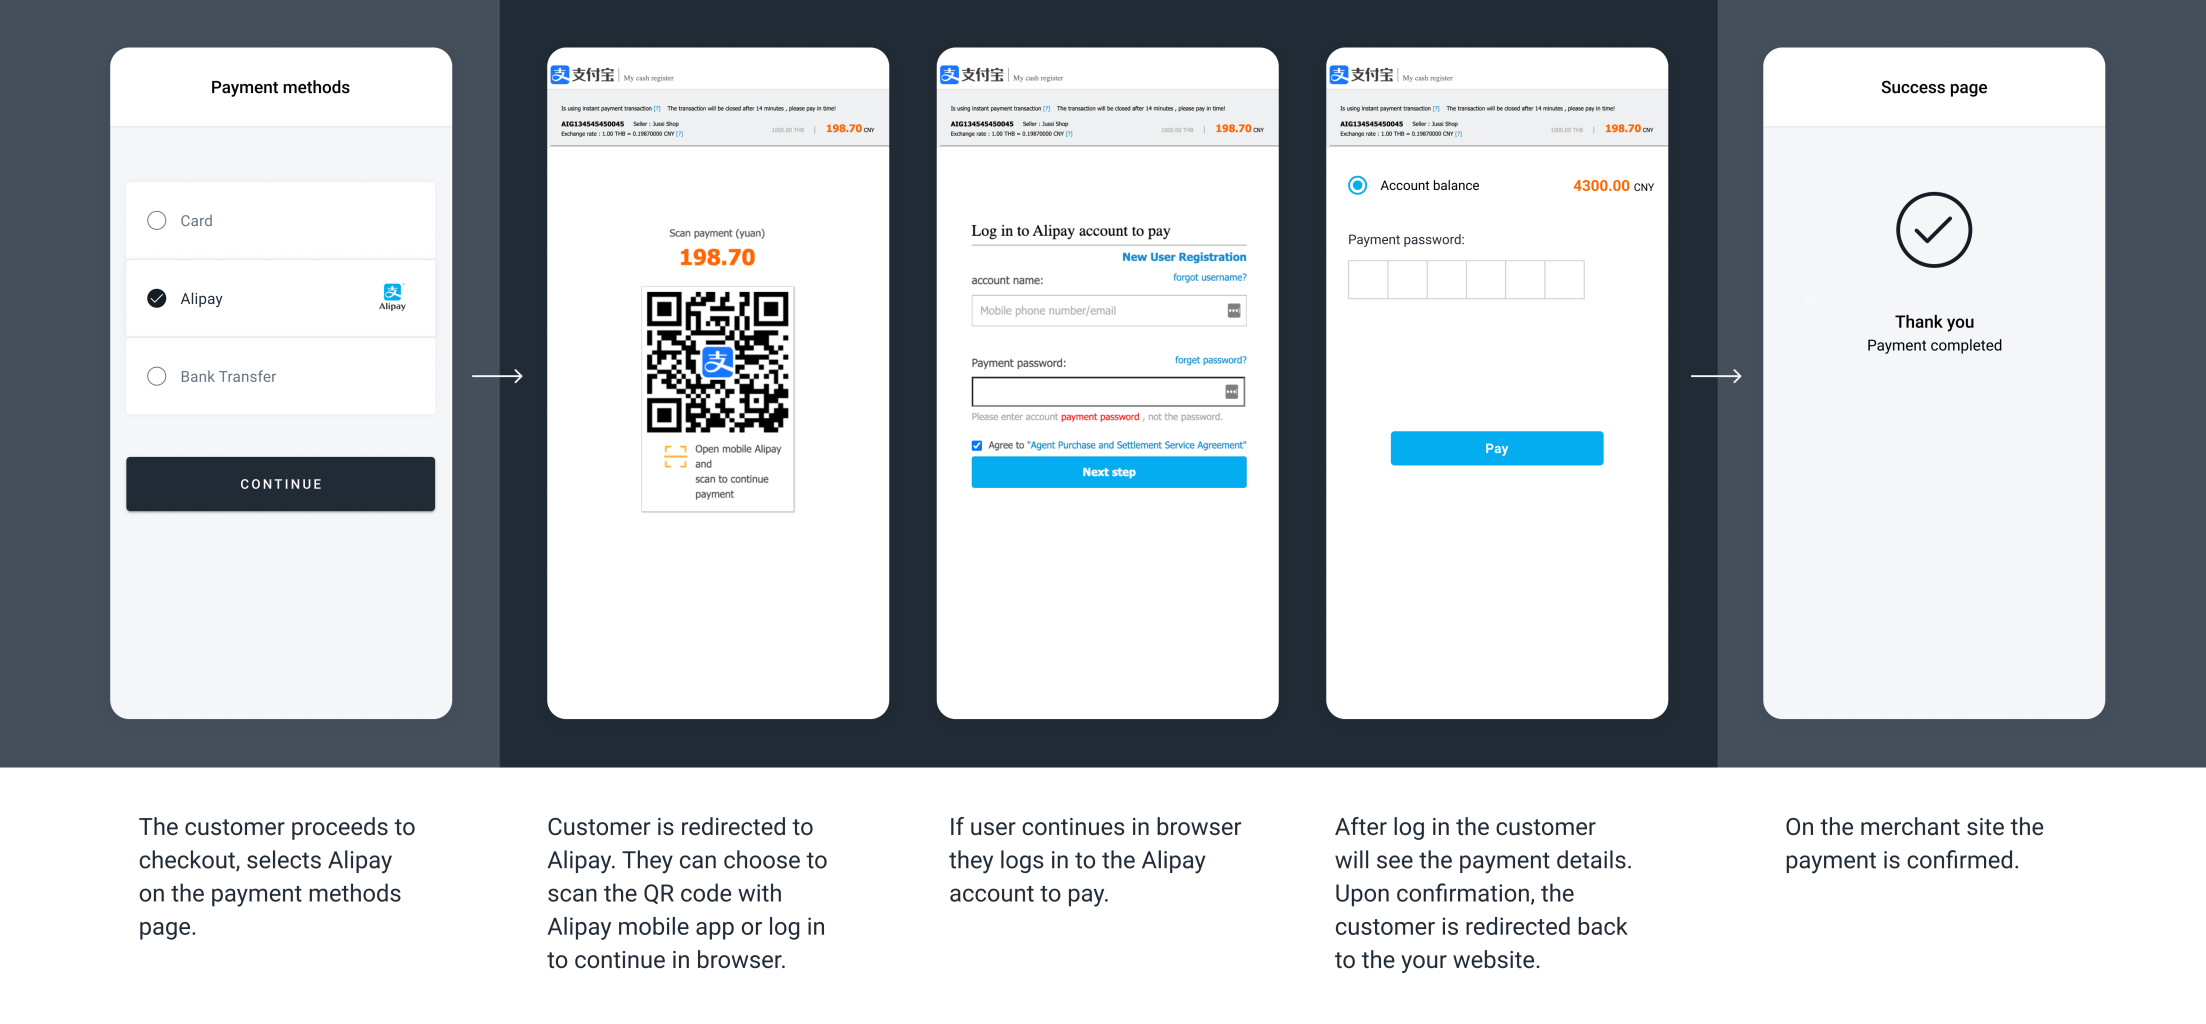 The screenshots illustrate a generic Alipay redirect flow on a browser.